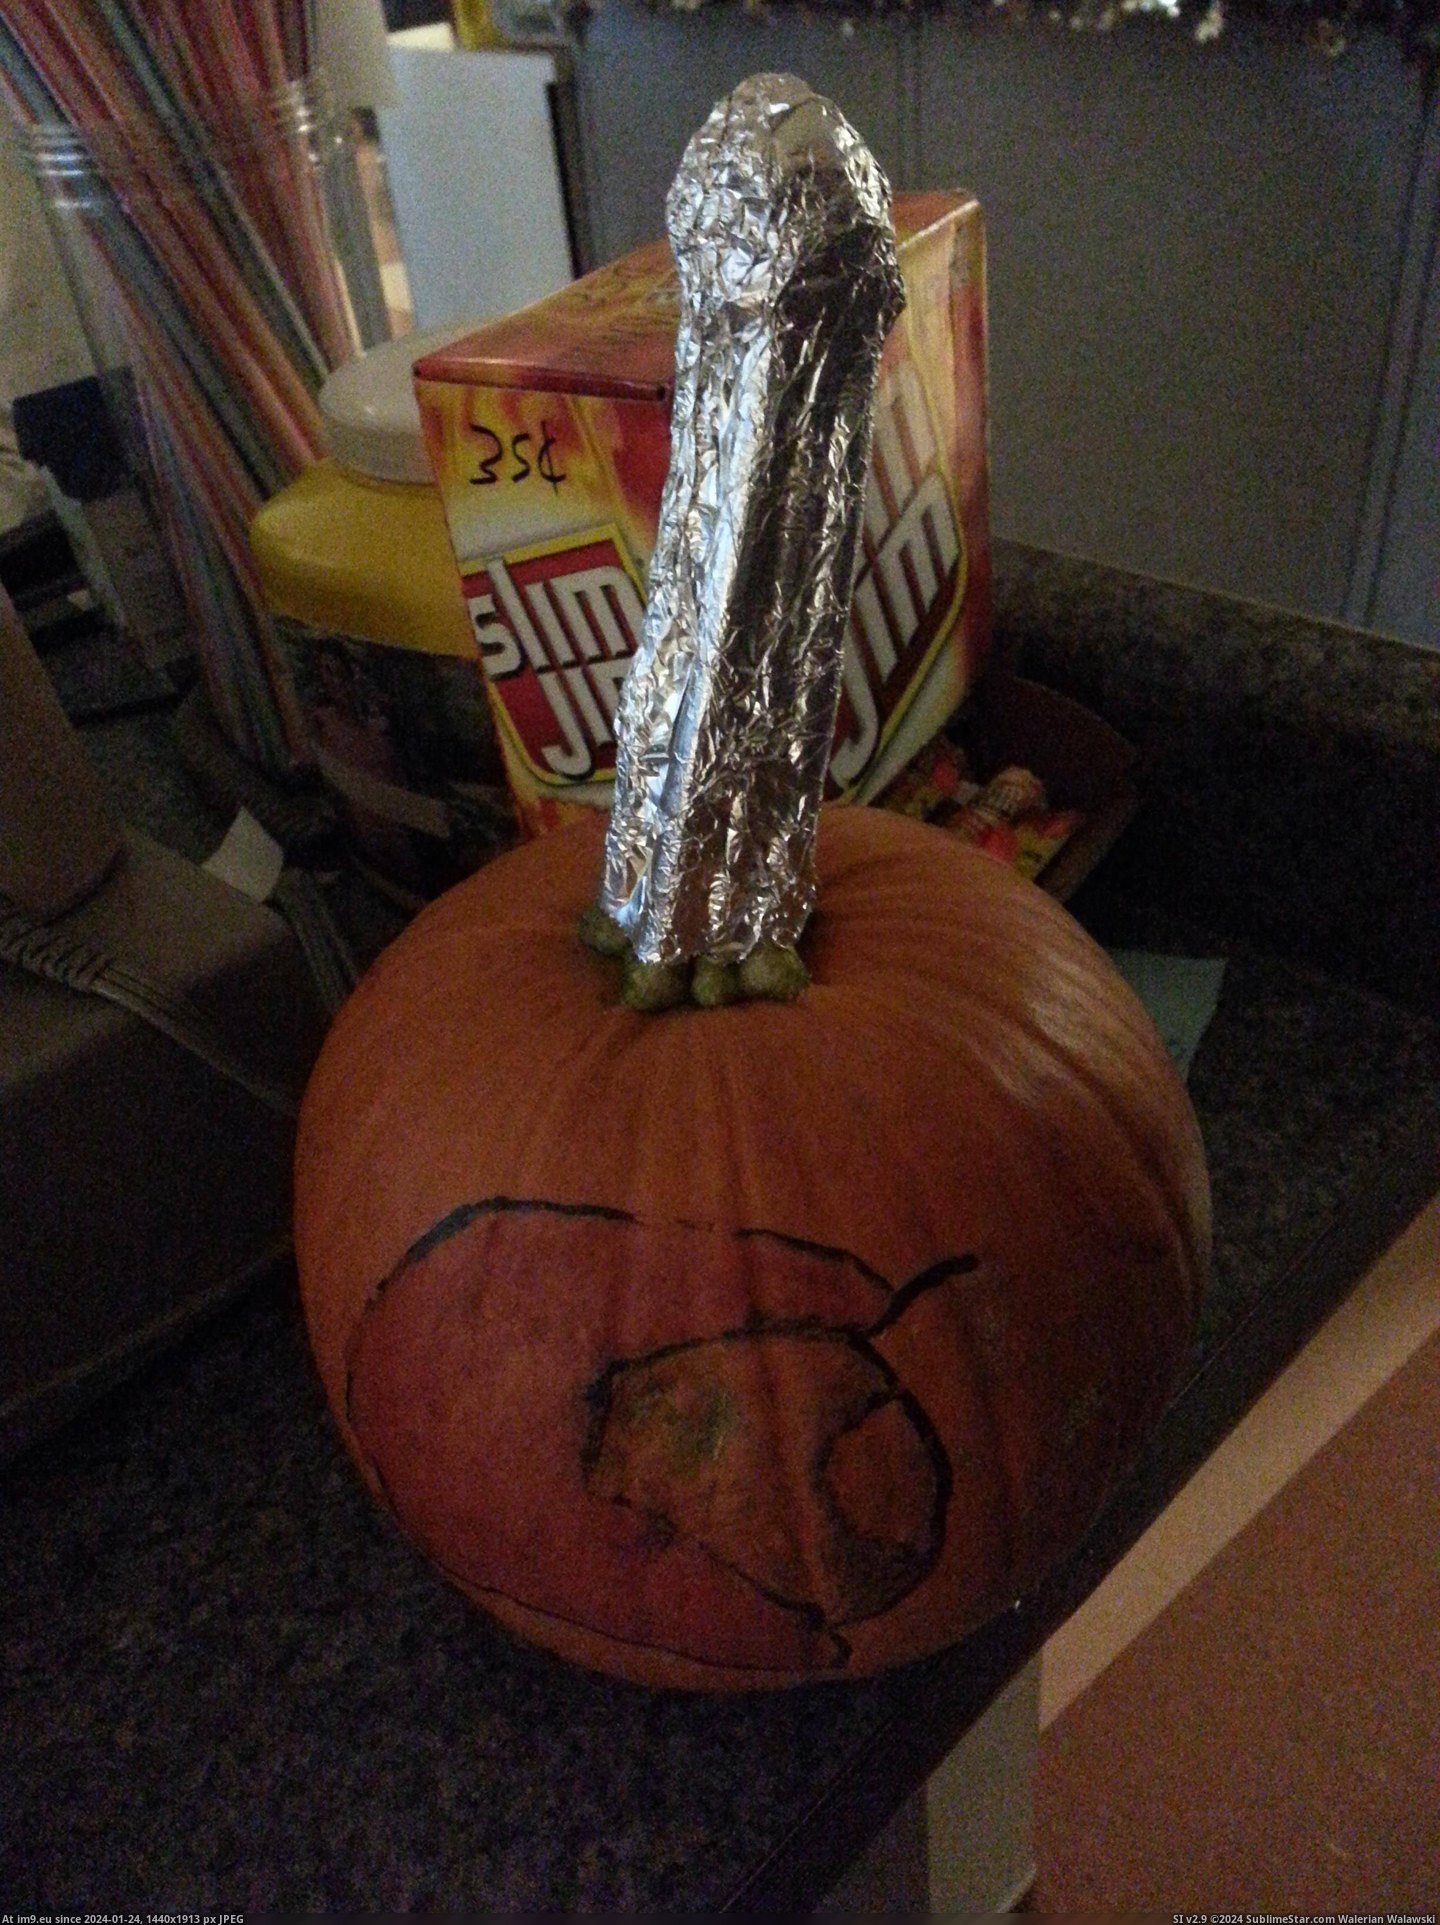 #Wtf #School #Pumpkin #Room #Lunch [Wtf] My school has this pumpkin by the register in the lunch room. Pic. (Image of album My r/WTF favs))